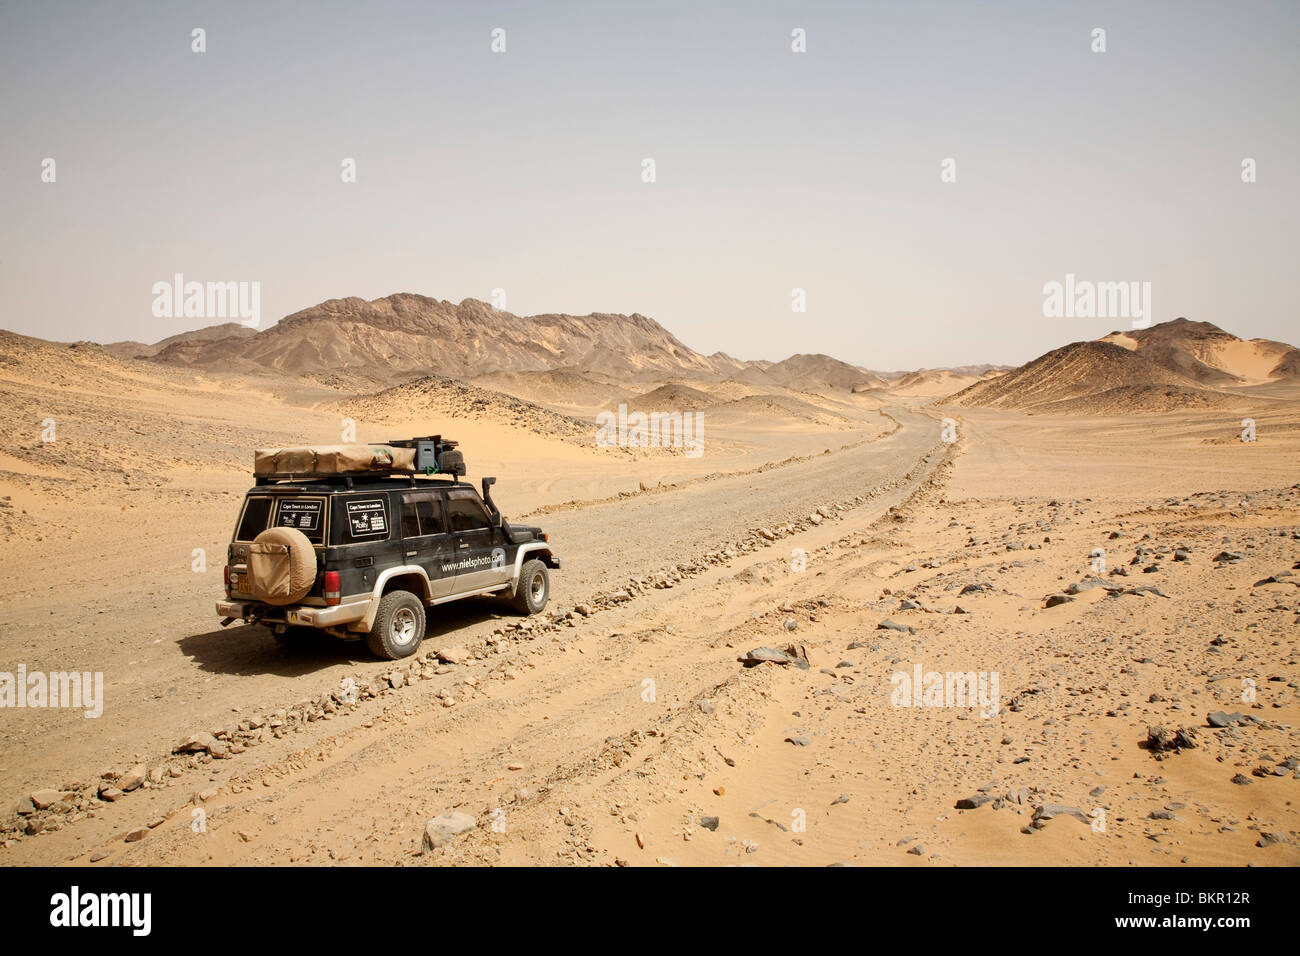 Sudan, South of Wadi Halfa. A 4x4 makes its way across the dirt roads in Northern Sudan. Stock Photo